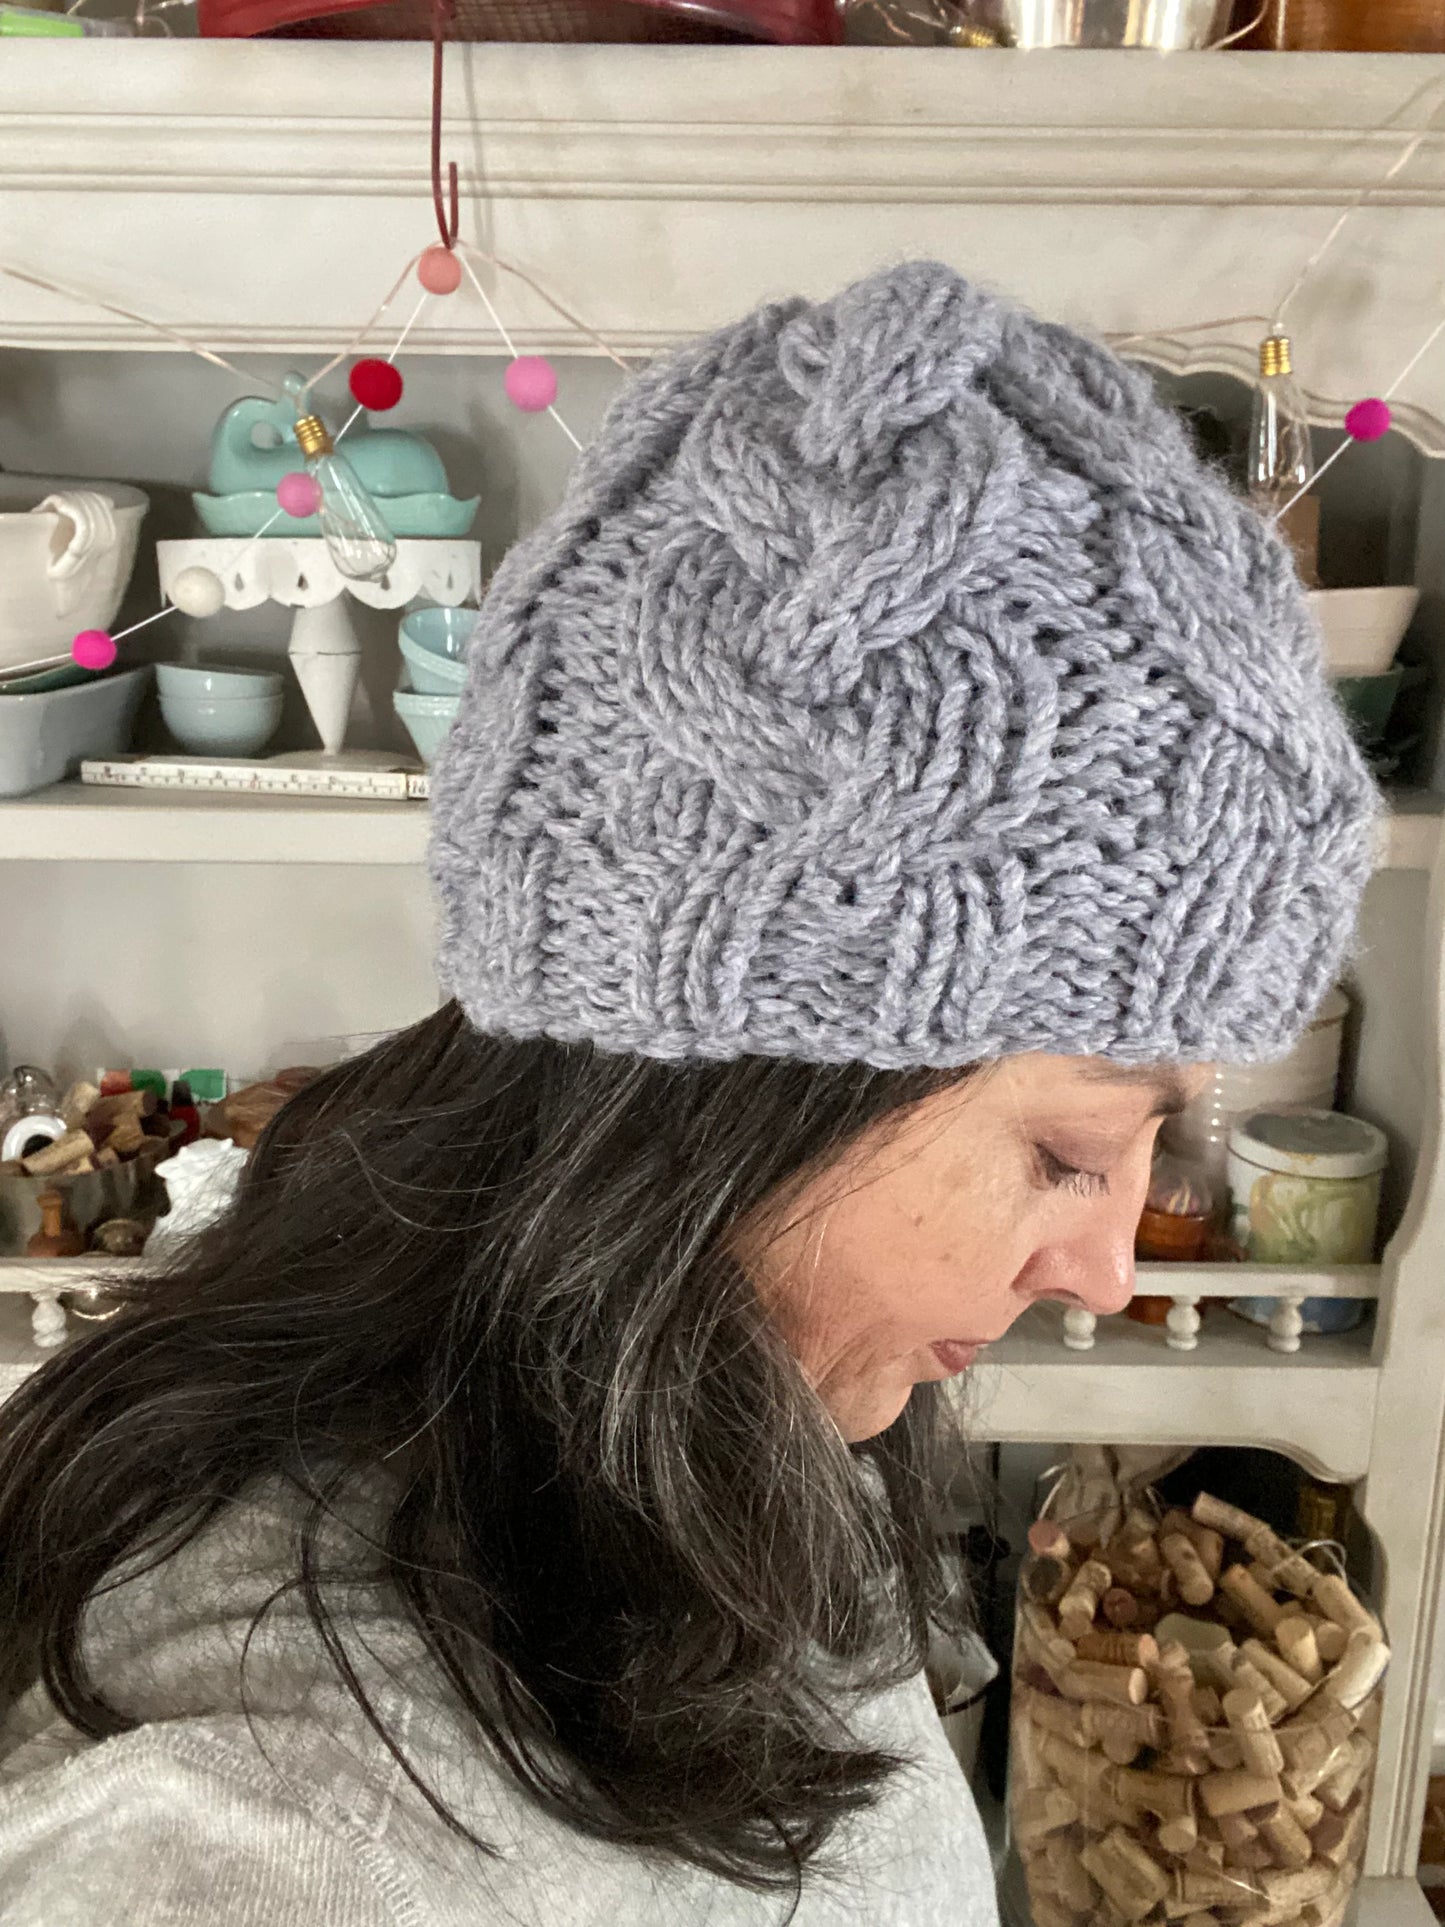 Cozy Cables Hat in Faded Denim and Raven- Recycled Synthetic Fiber blend